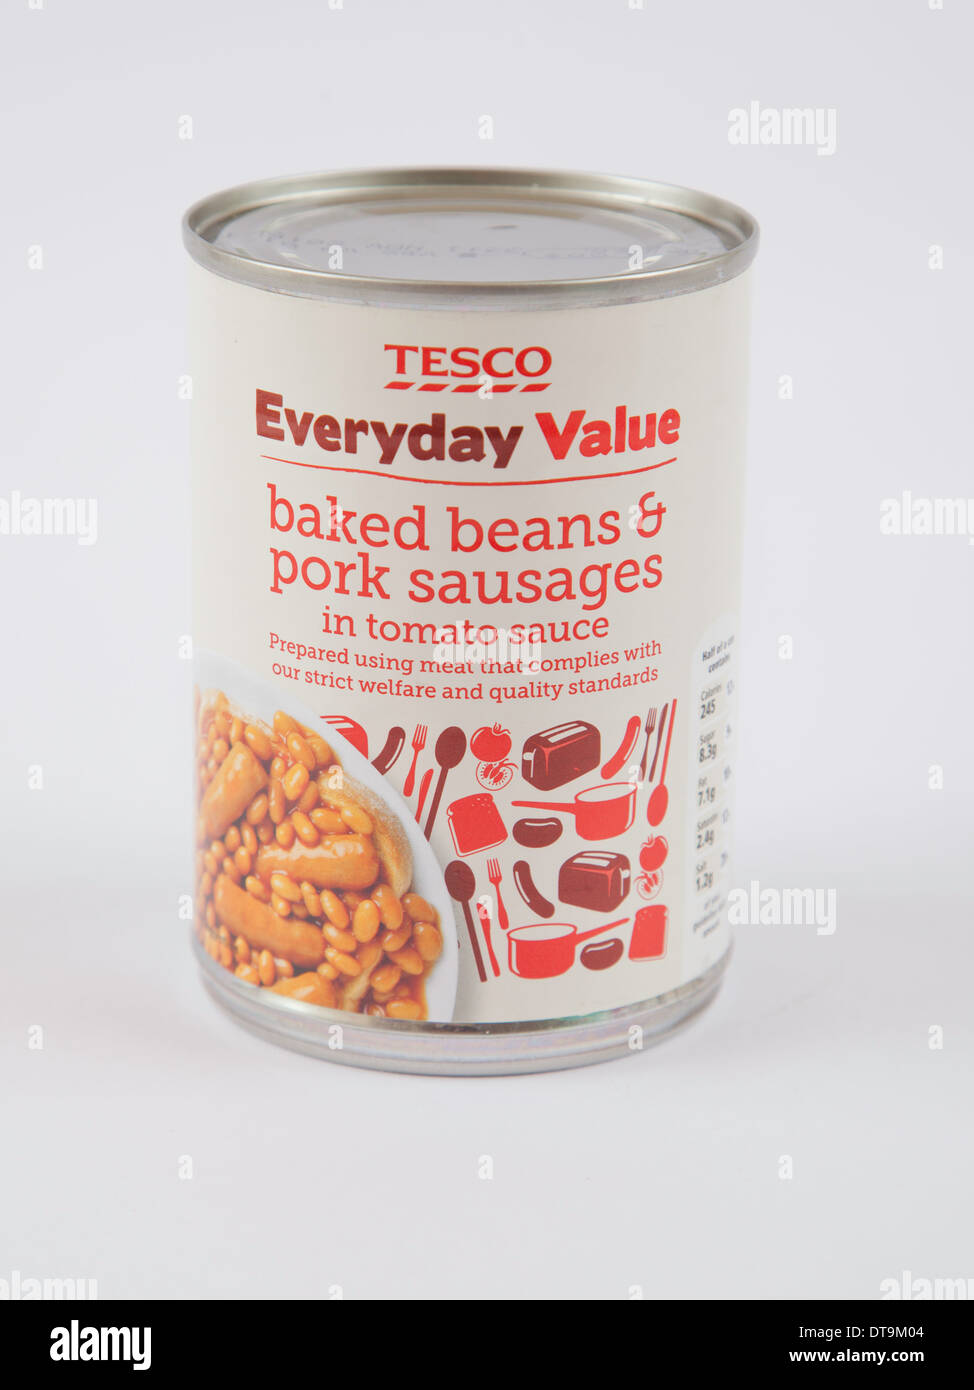 Tesco Everyday Value Tinned Baked Beans & Sausages in Tomato Sauce Stock Photo